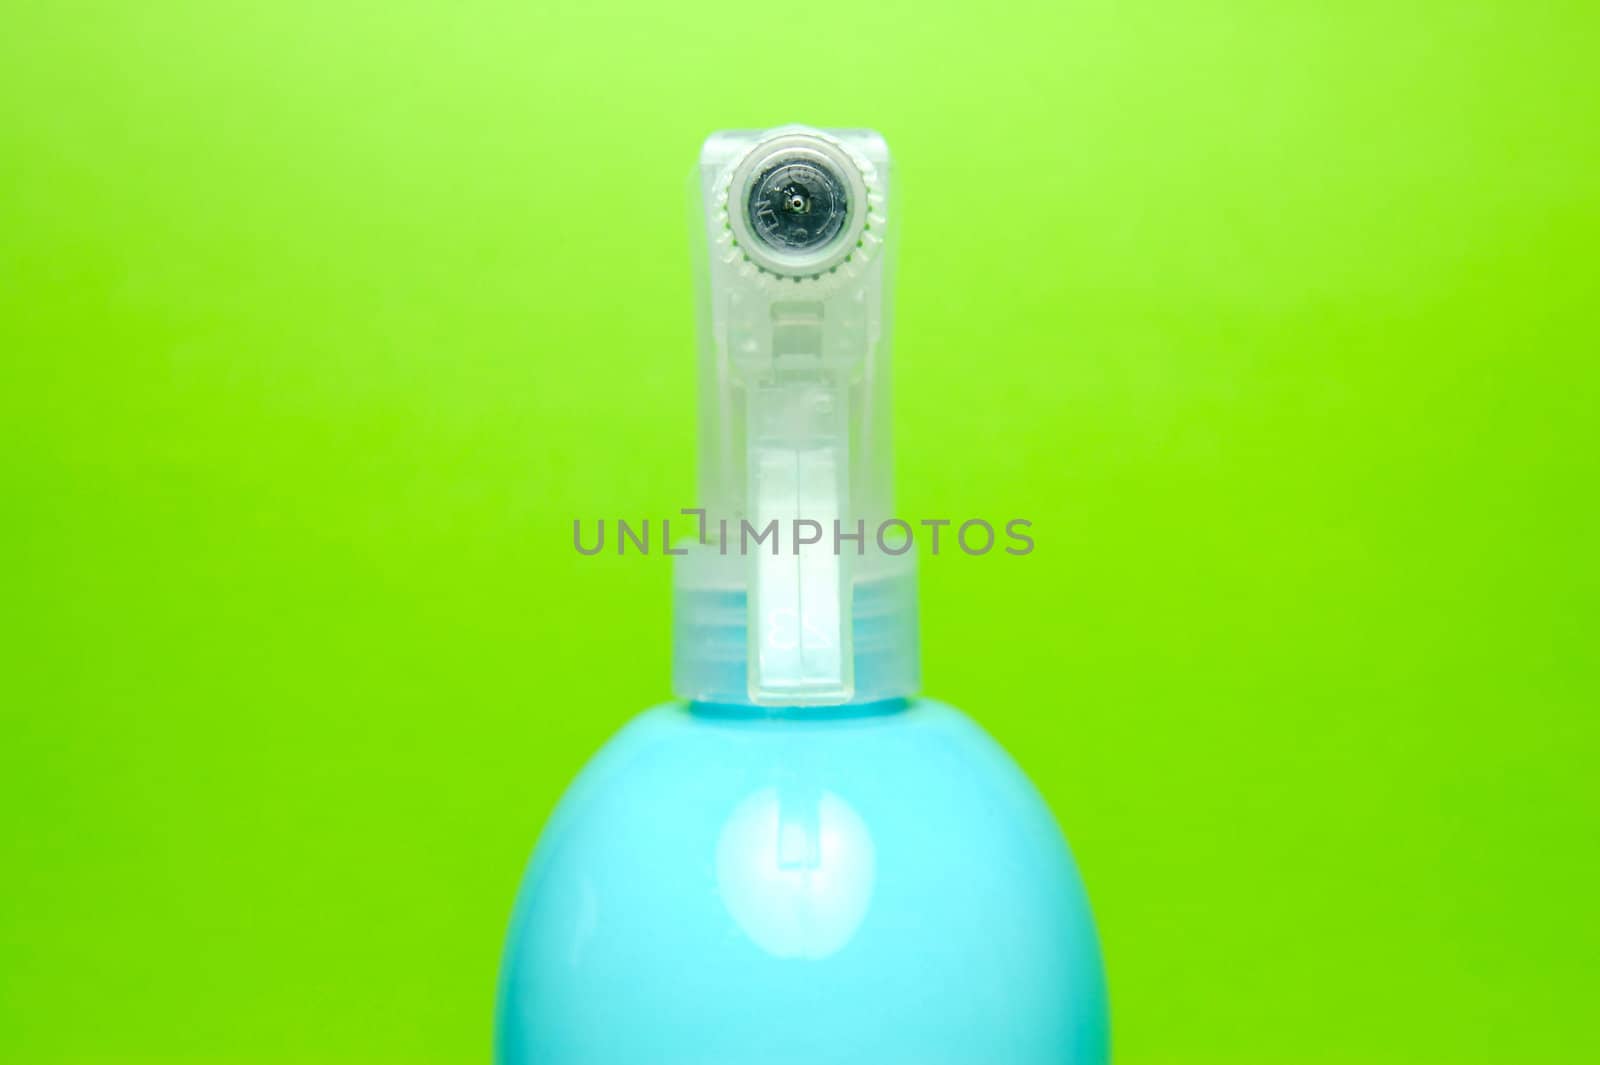 A spray bottle isolated against a blue background